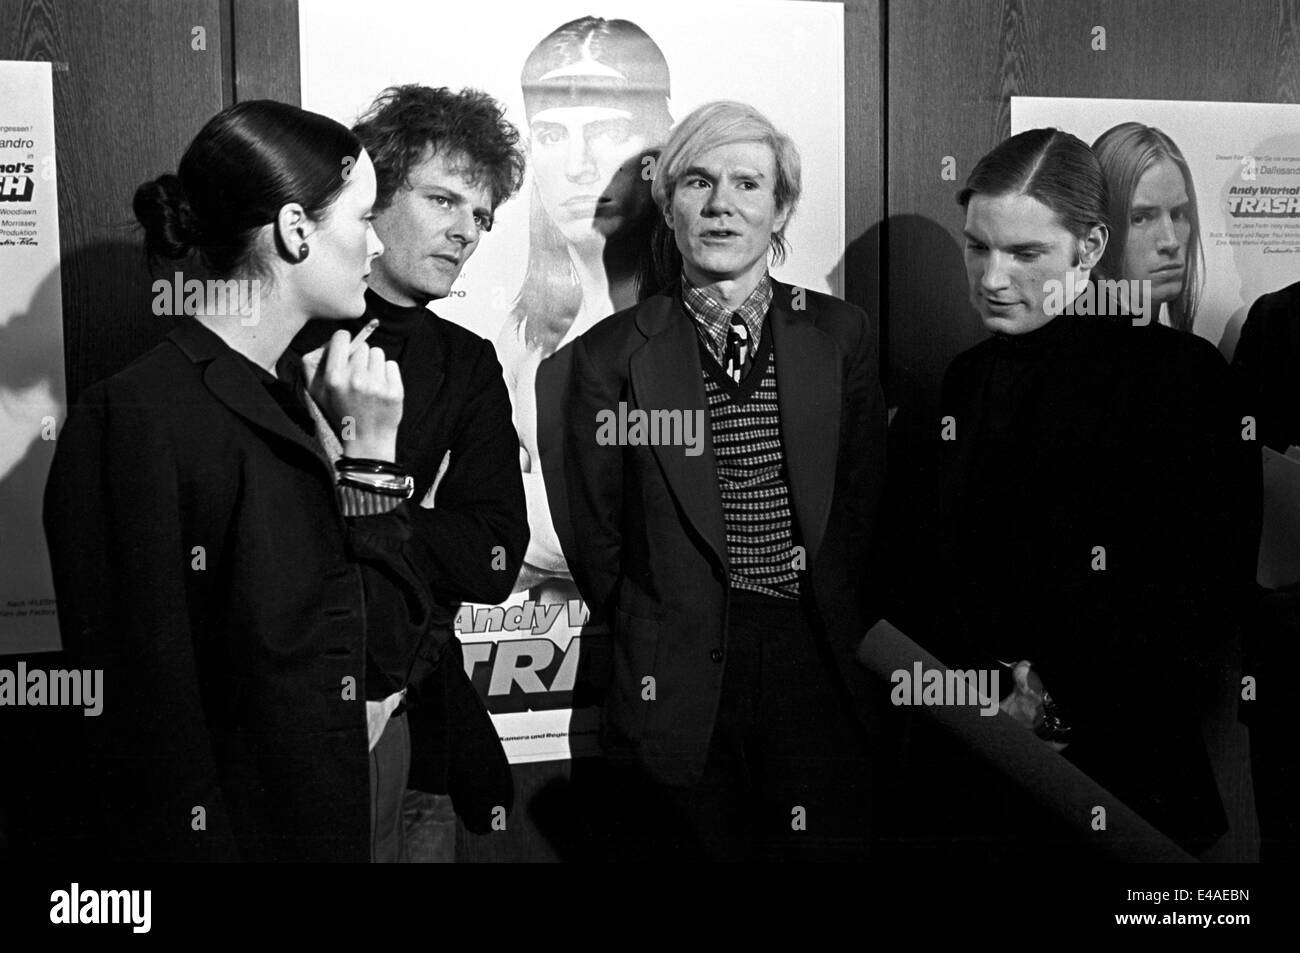 (File) The US artist and director Andy Warhol (middle) and his leading actress Jane Forth (far left) as well as Joe Dallesandro (right)  pose in Munich on 17 February 1971 before for the premiere of his latest film 'Trash'. Person 2nd to the left is not identified. Stock Photo